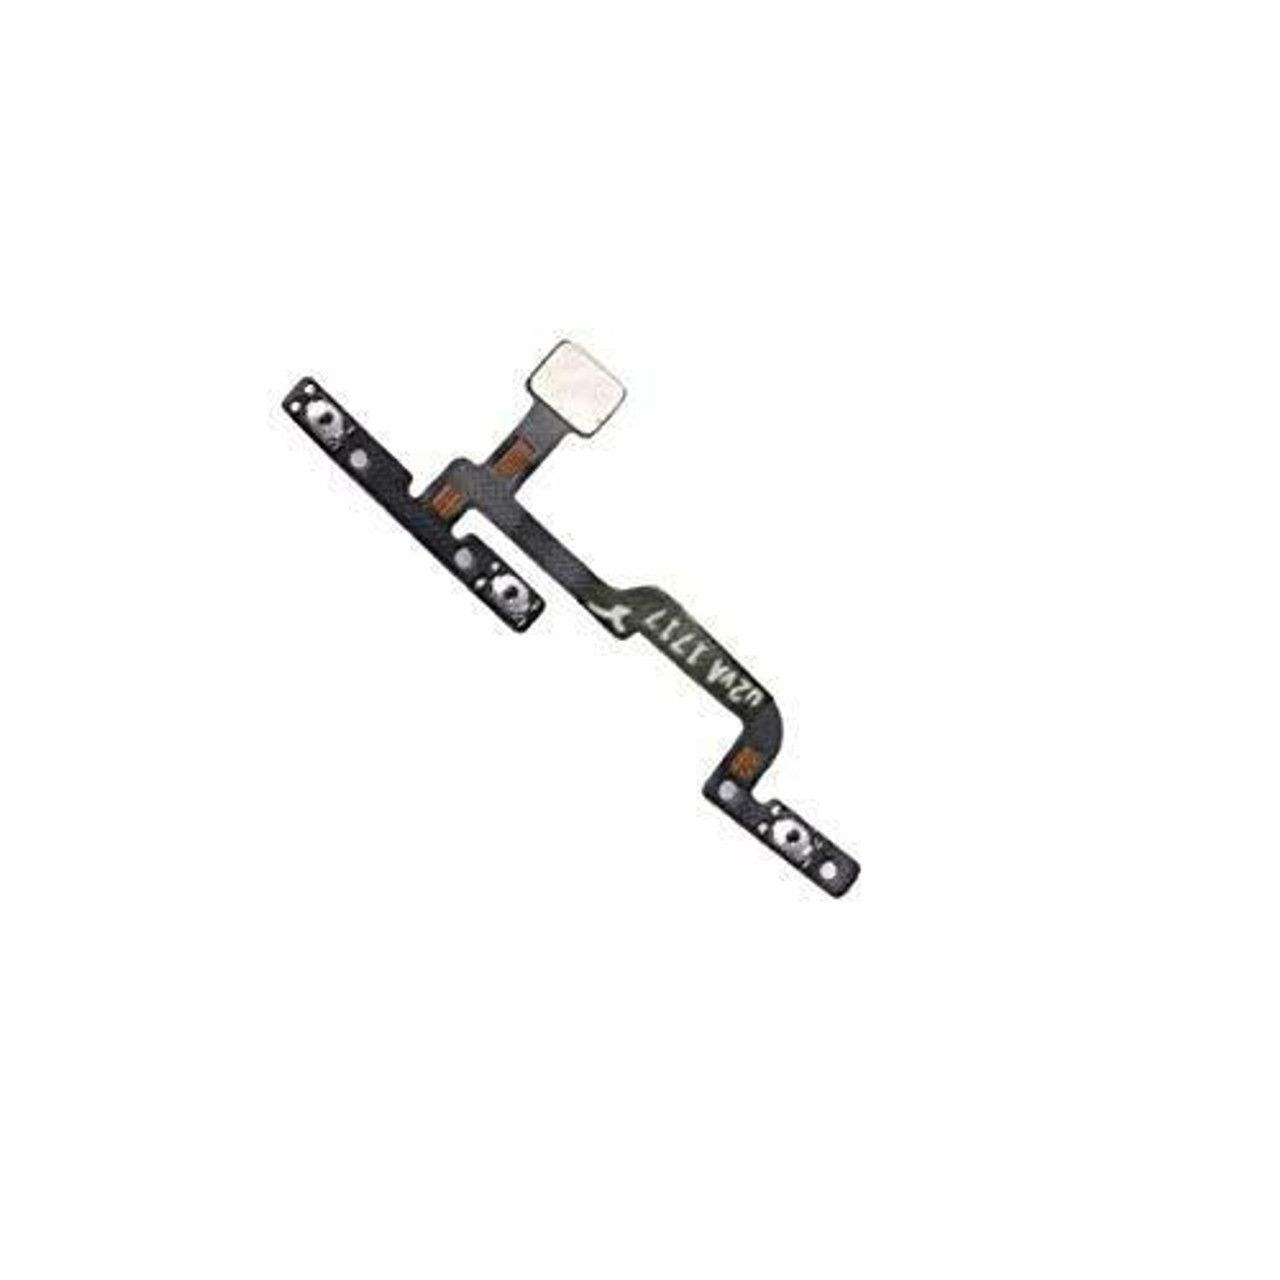 OEM ZTE Max XL N9560 Power Volume Button Switch Flex Cable Ribbon Replacement